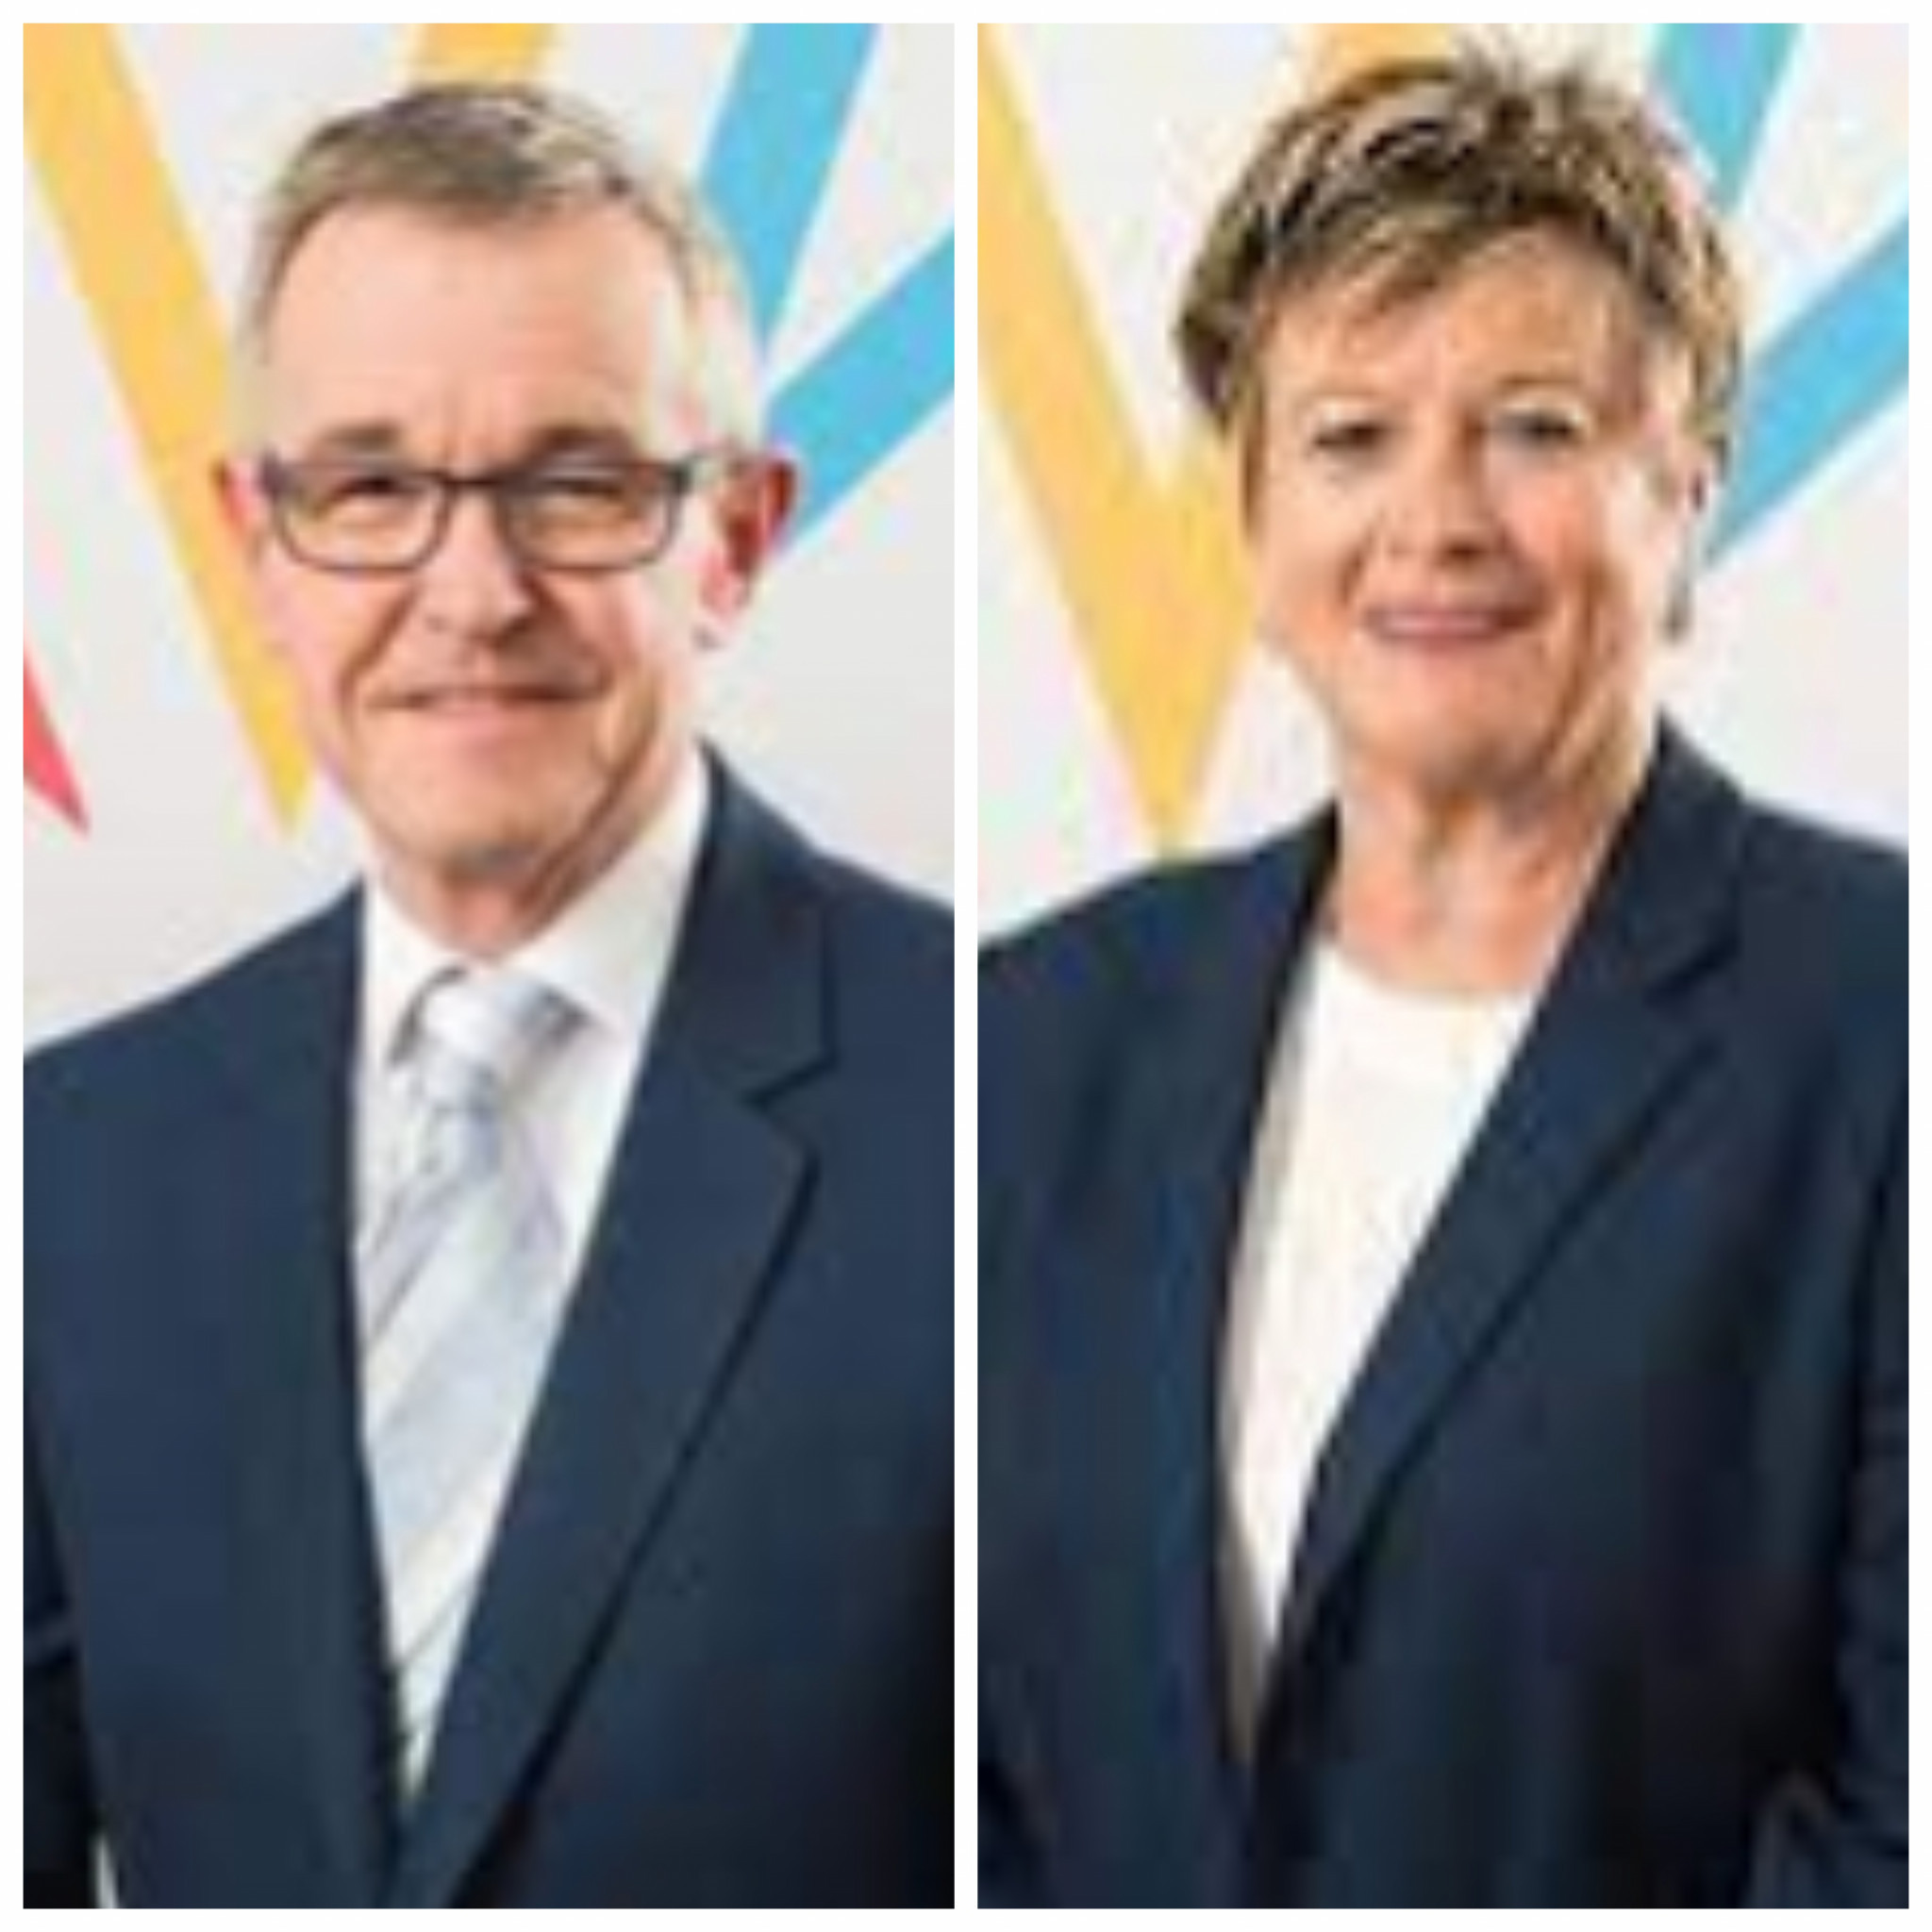 Jenkins and Smith stand to succeed Dame Louise Martin as Commonwealth Games Federation President